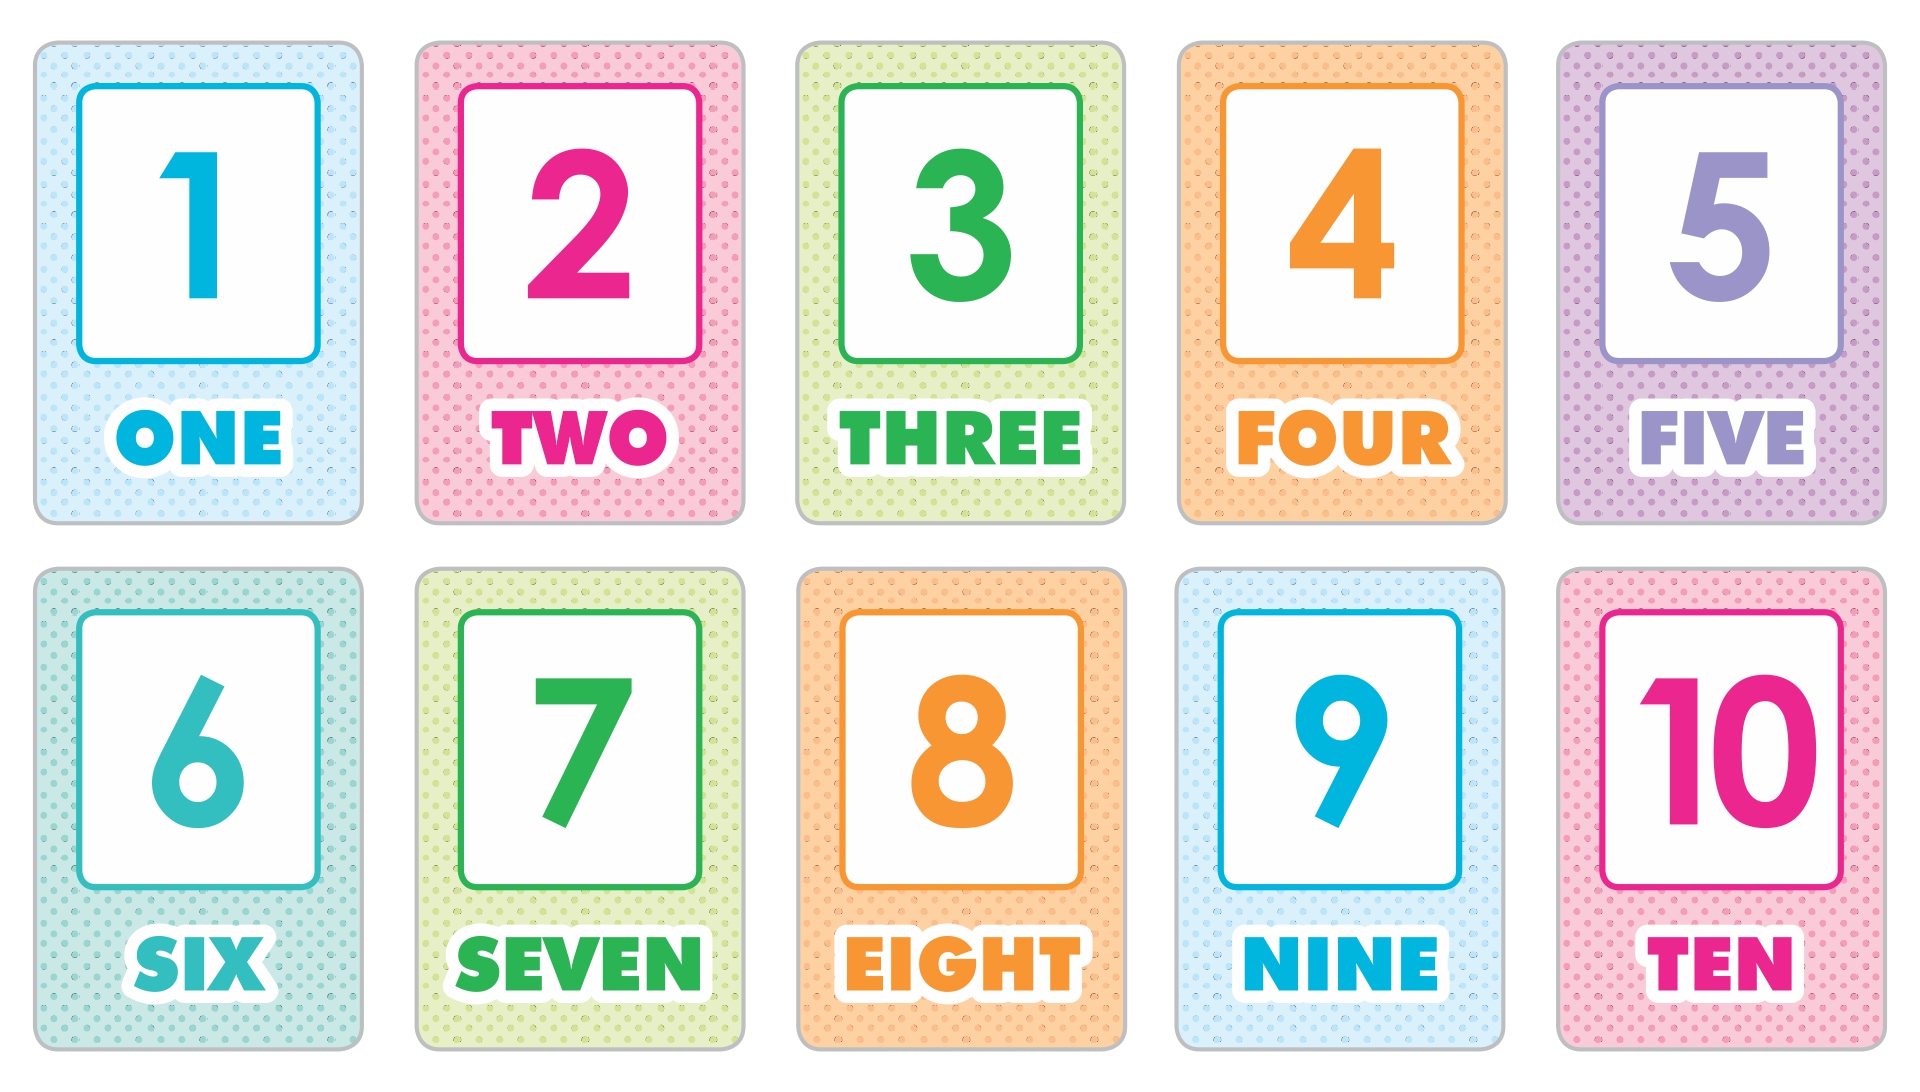 9-best-images-of-printable-number-cards-printable-number-flash-card-1-free-printable-number